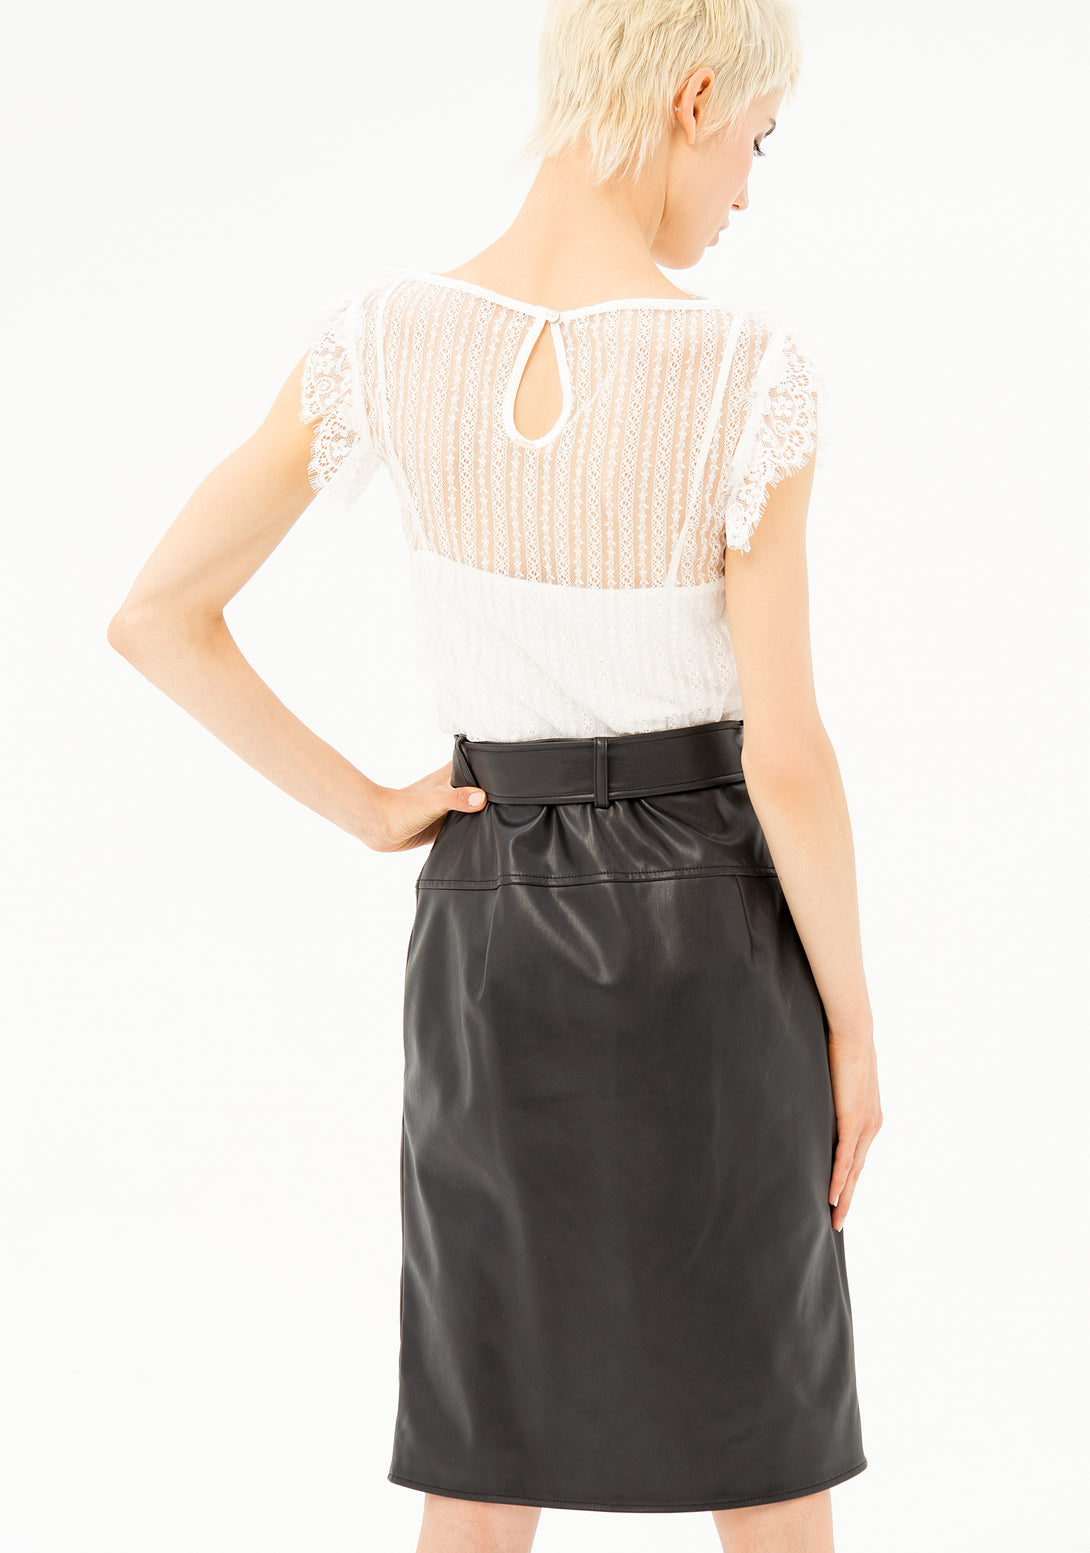 Sheath skirt skinny fit, middle length, made in eco leather